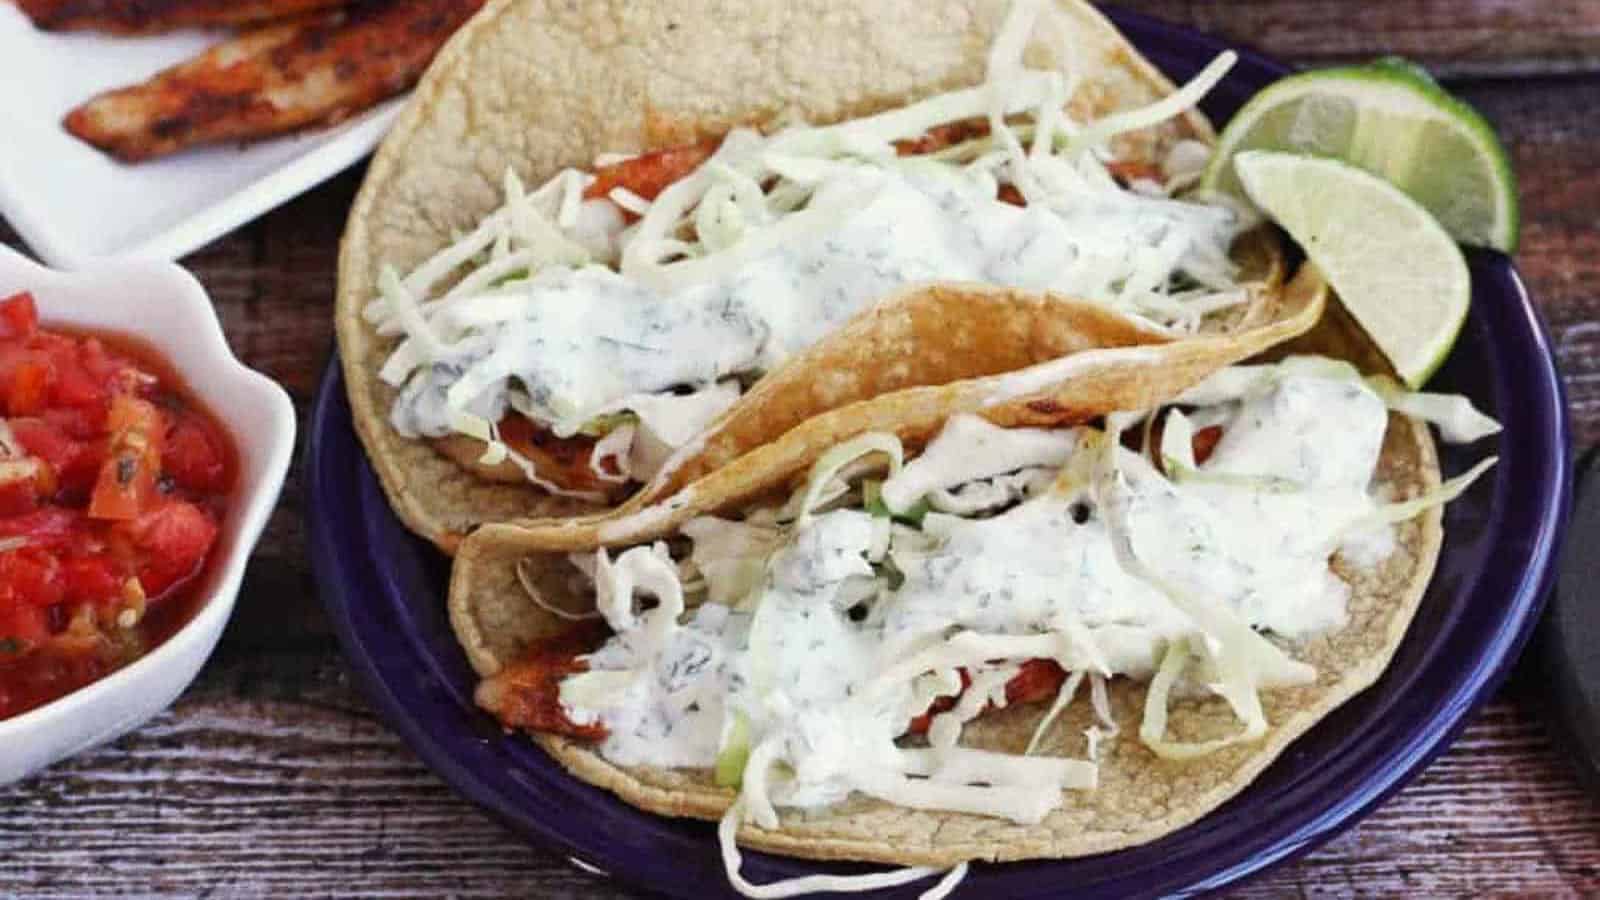 Fish tacos with shredded cabbage and cilantro lime crema.